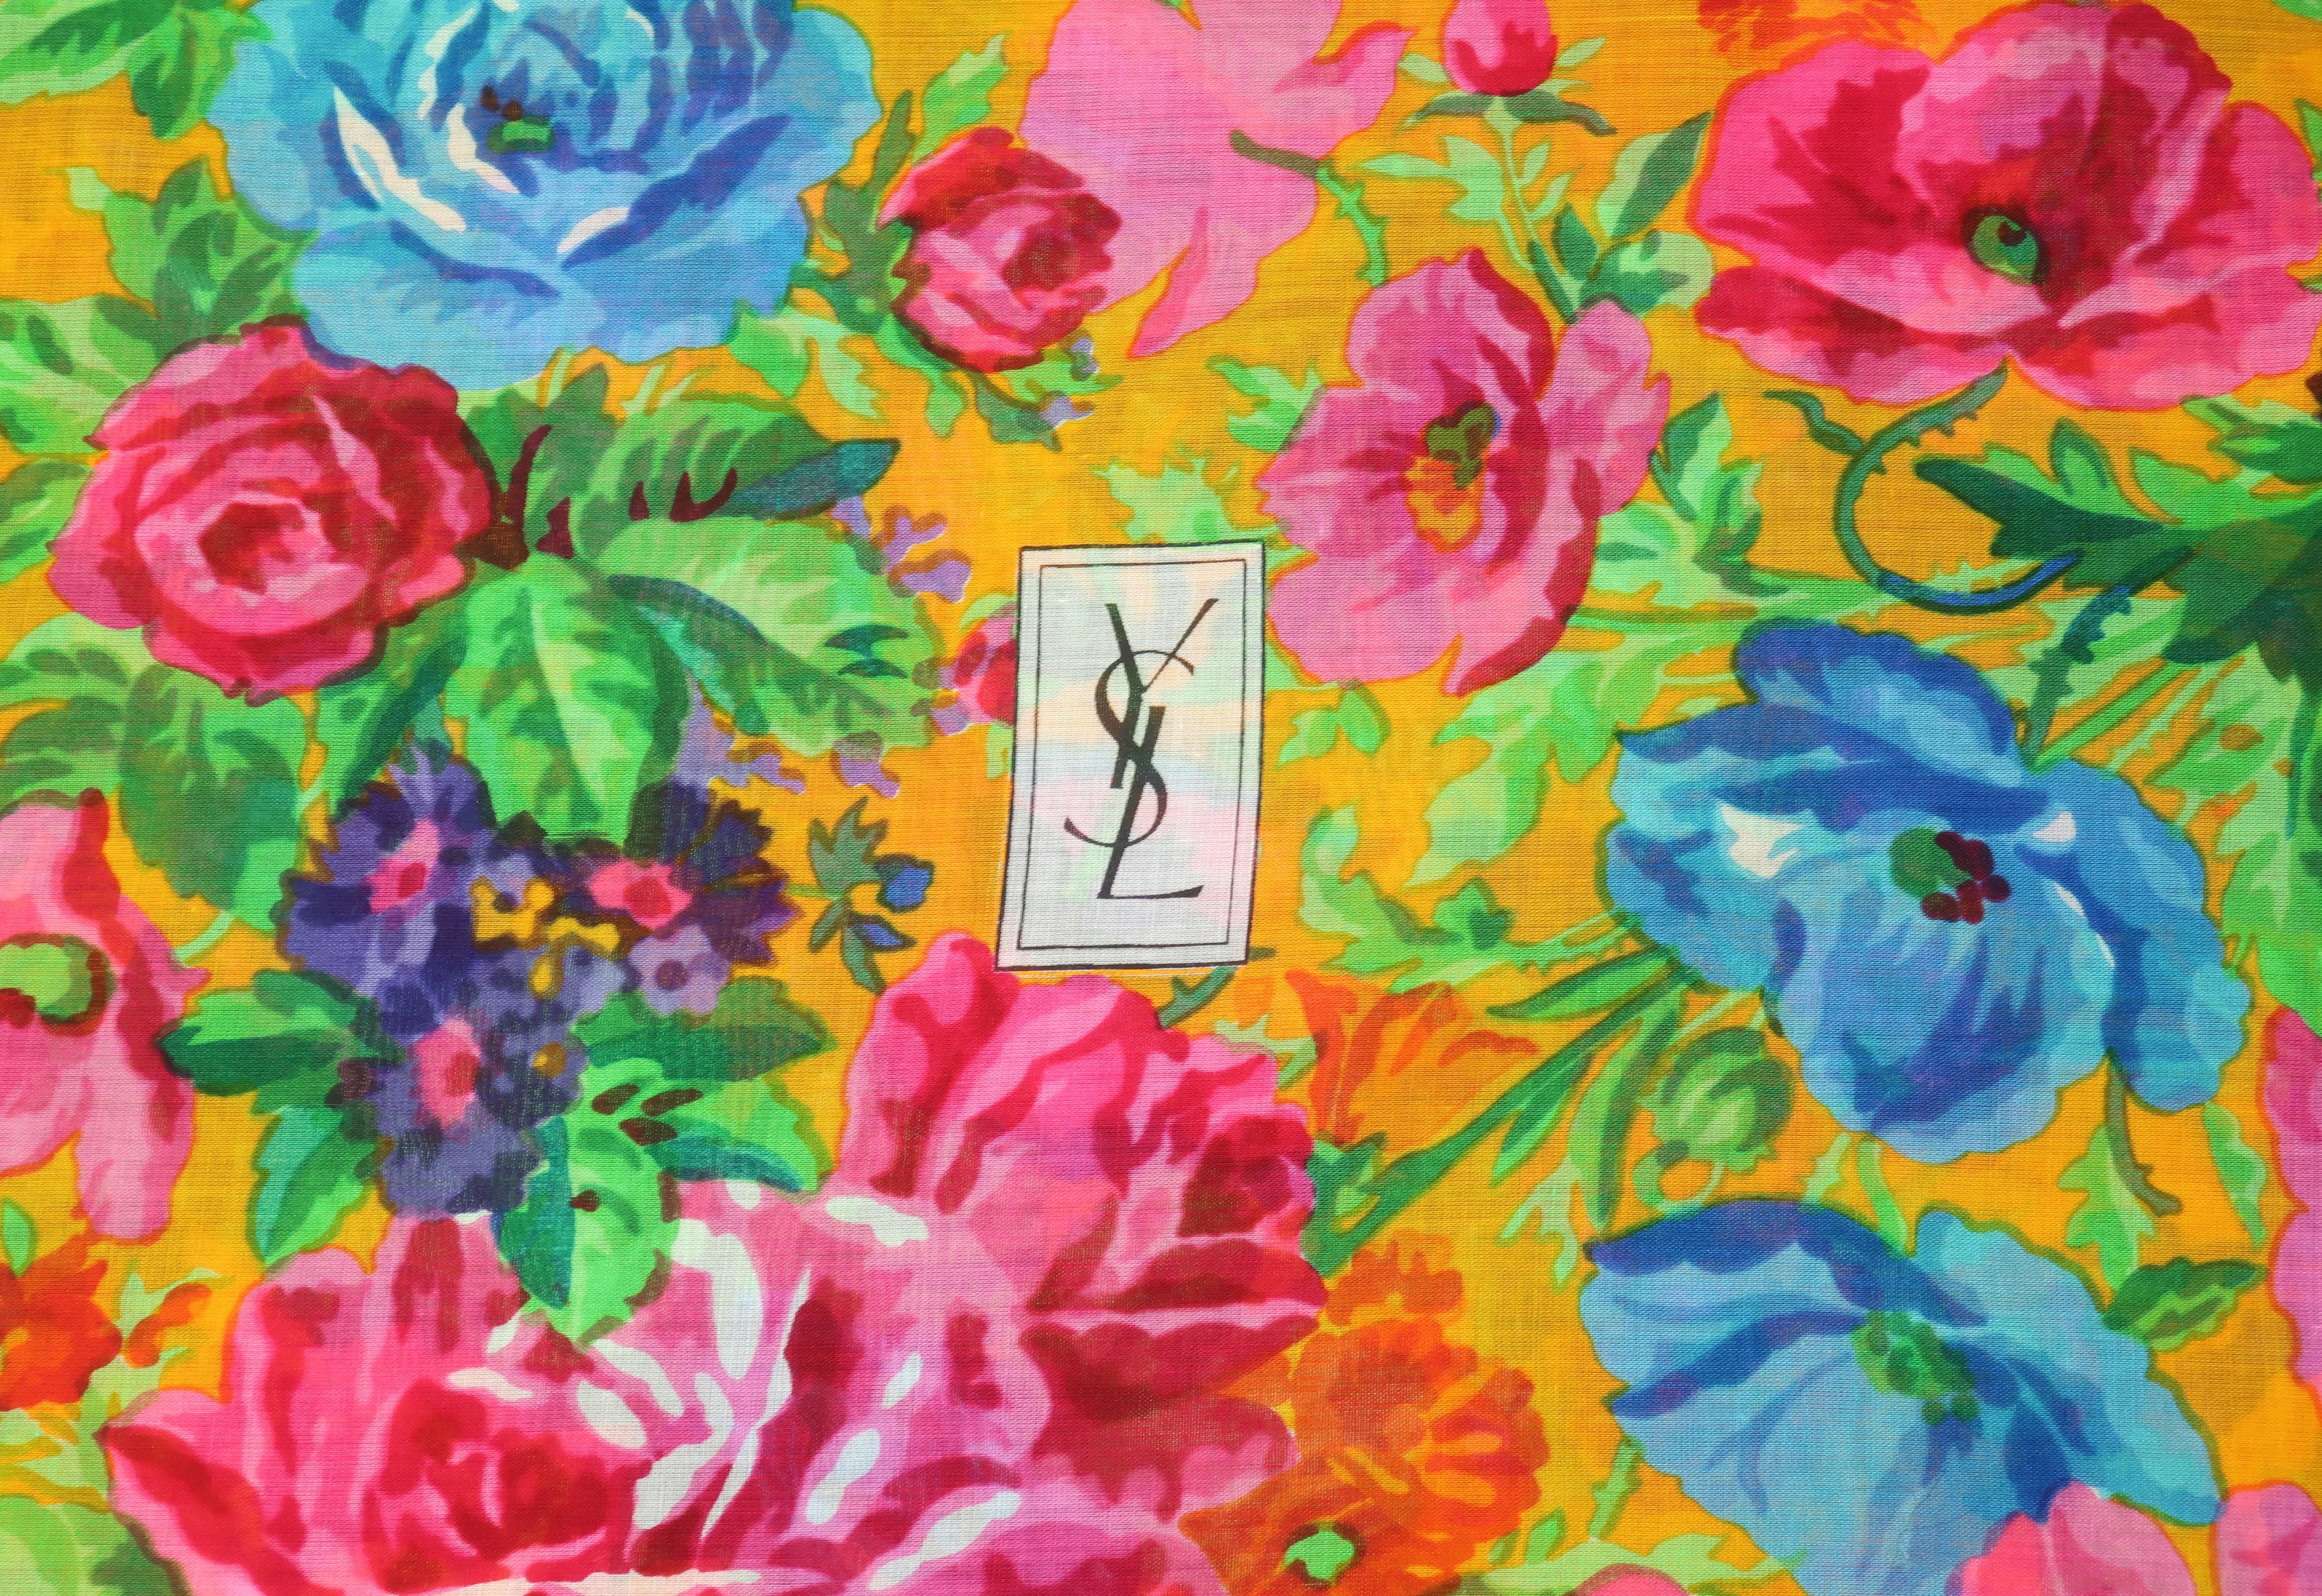 Wrap yourself in a fine cotton bouquet with Yves Saint Laurent's 1980's version of a colorful garden.  This extra large 54